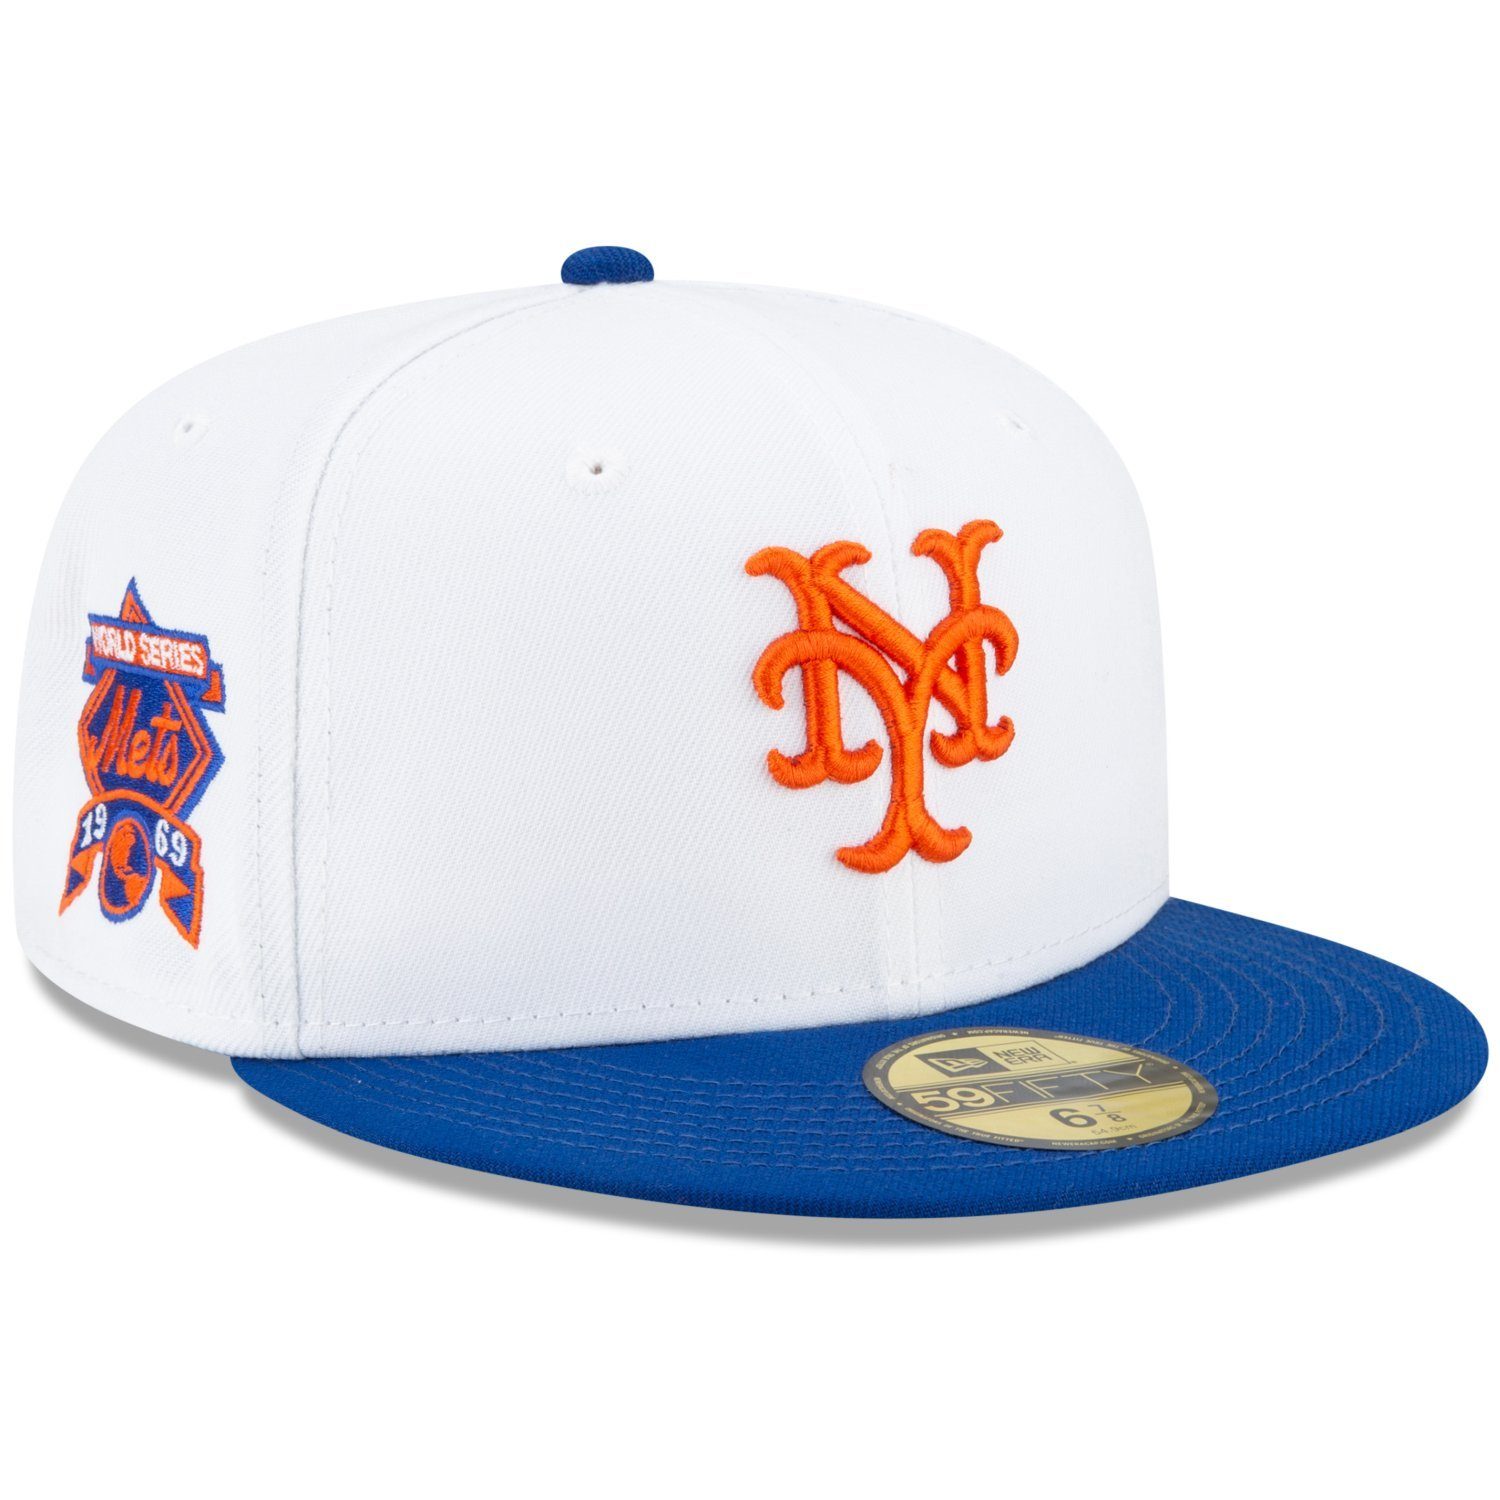 Era York SERIES Fitted Cap WORLD 1969 59Fifty Mets New New